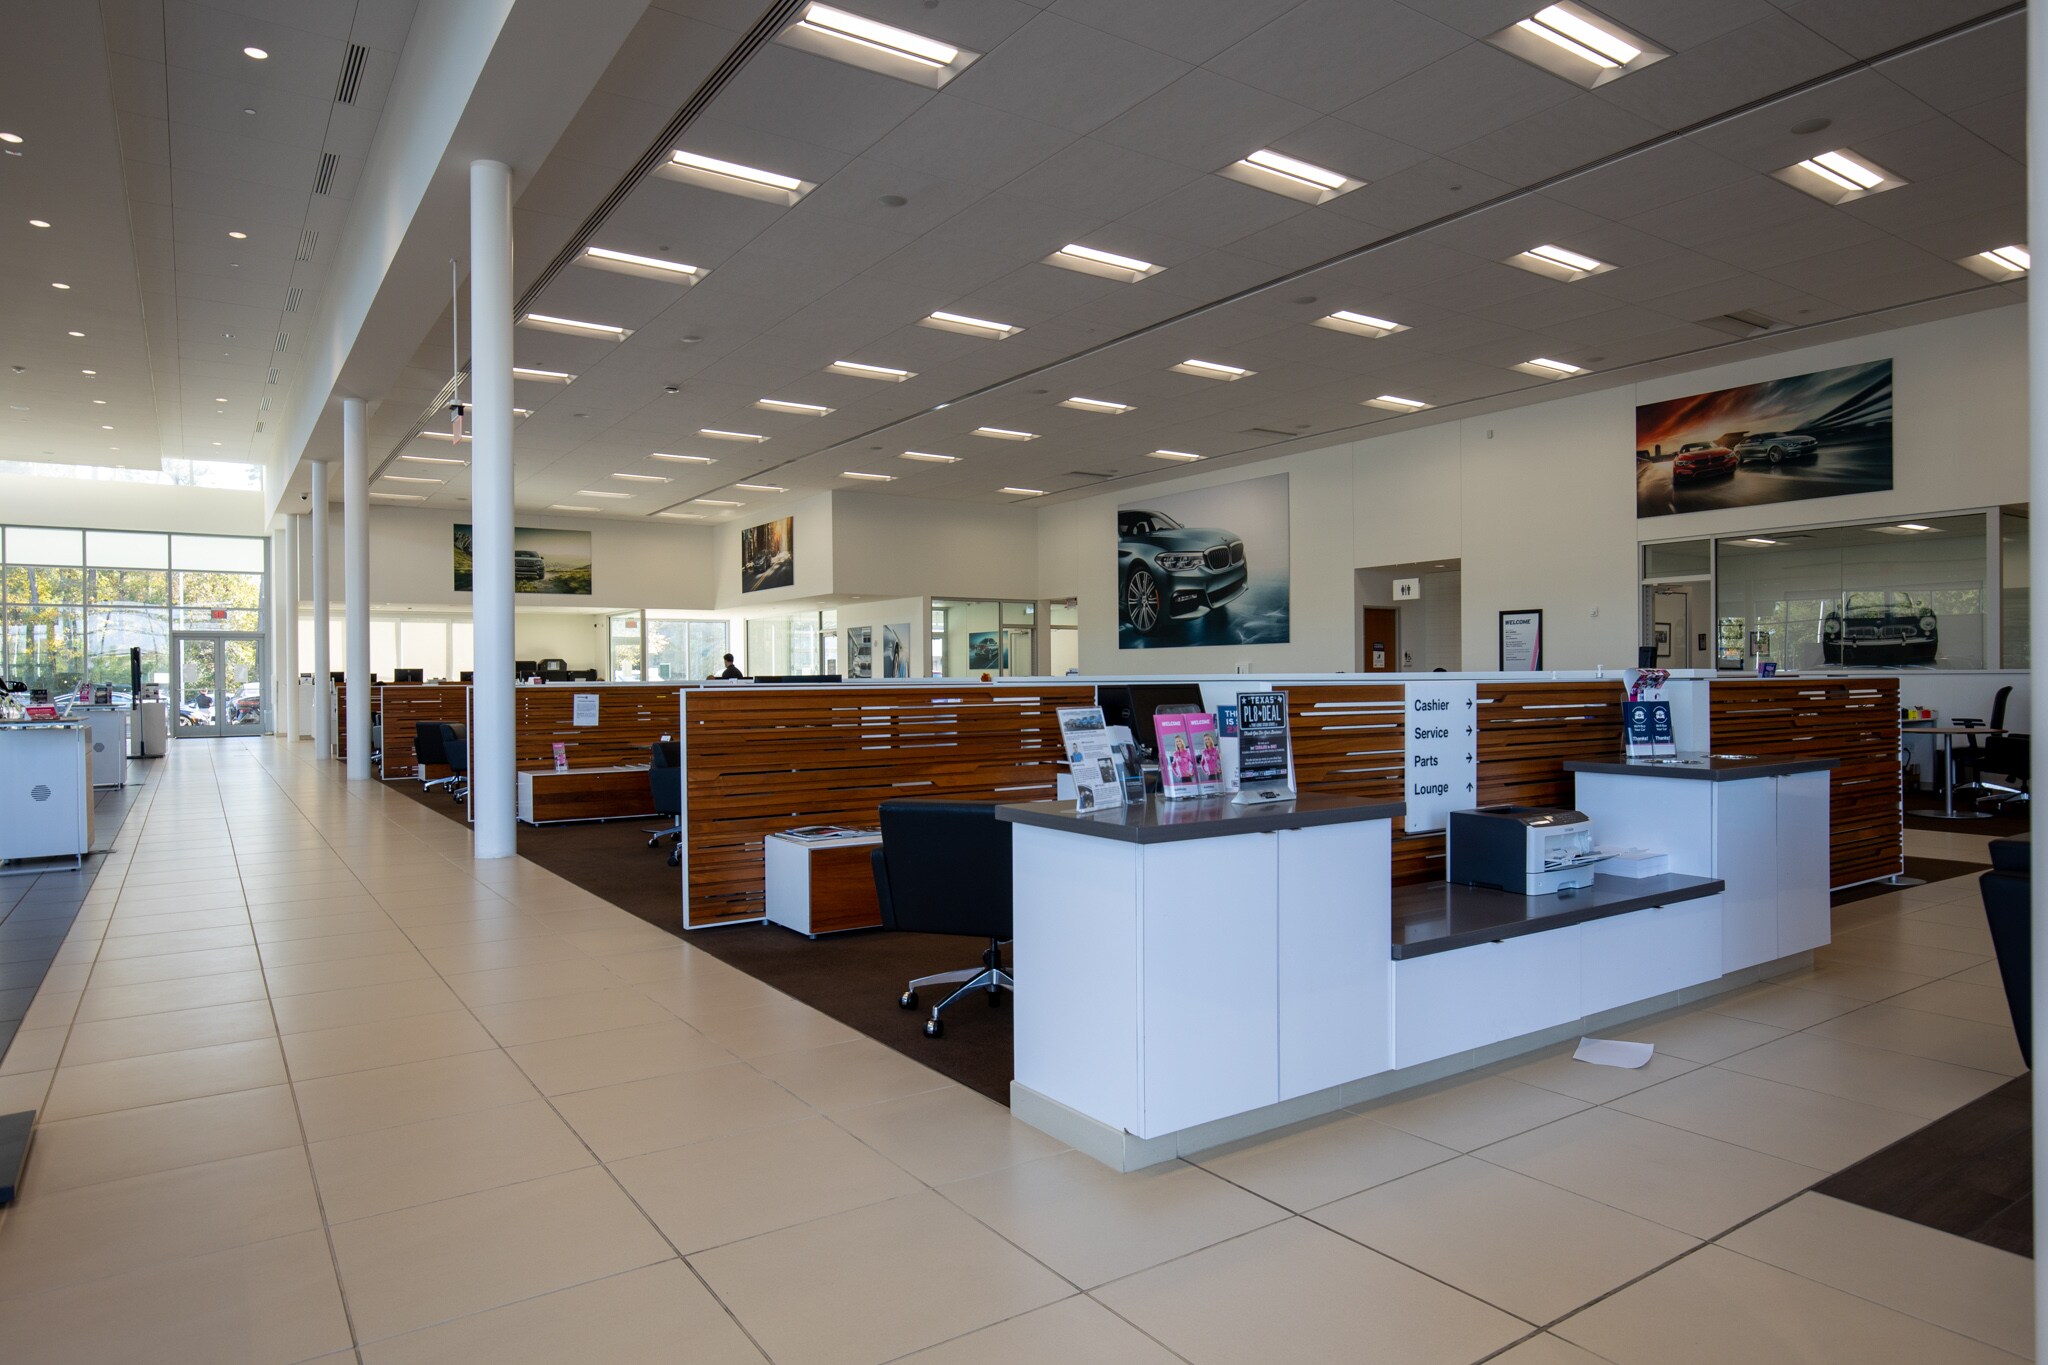 Interior view of BMW of The Woodlands, featuring several bays of desks and chairs.